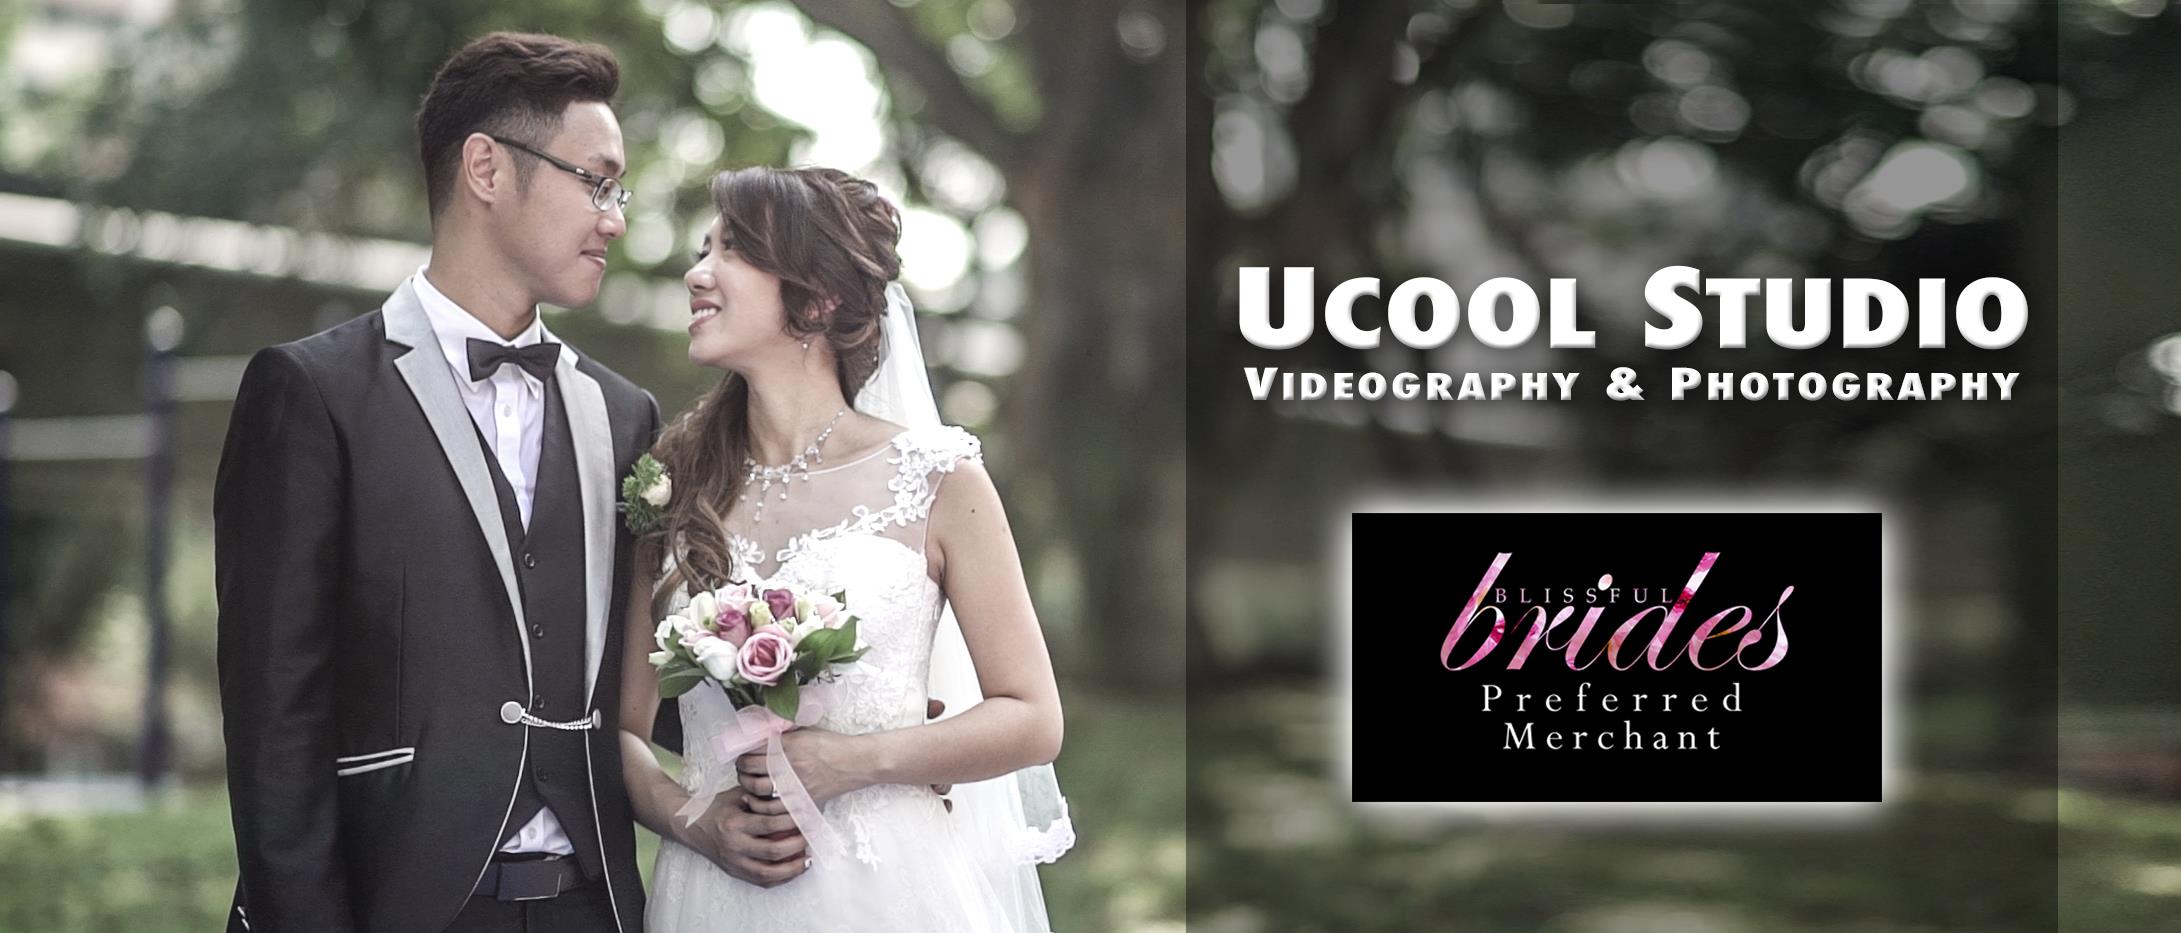 UCOOL STUDIO Videography & Photography